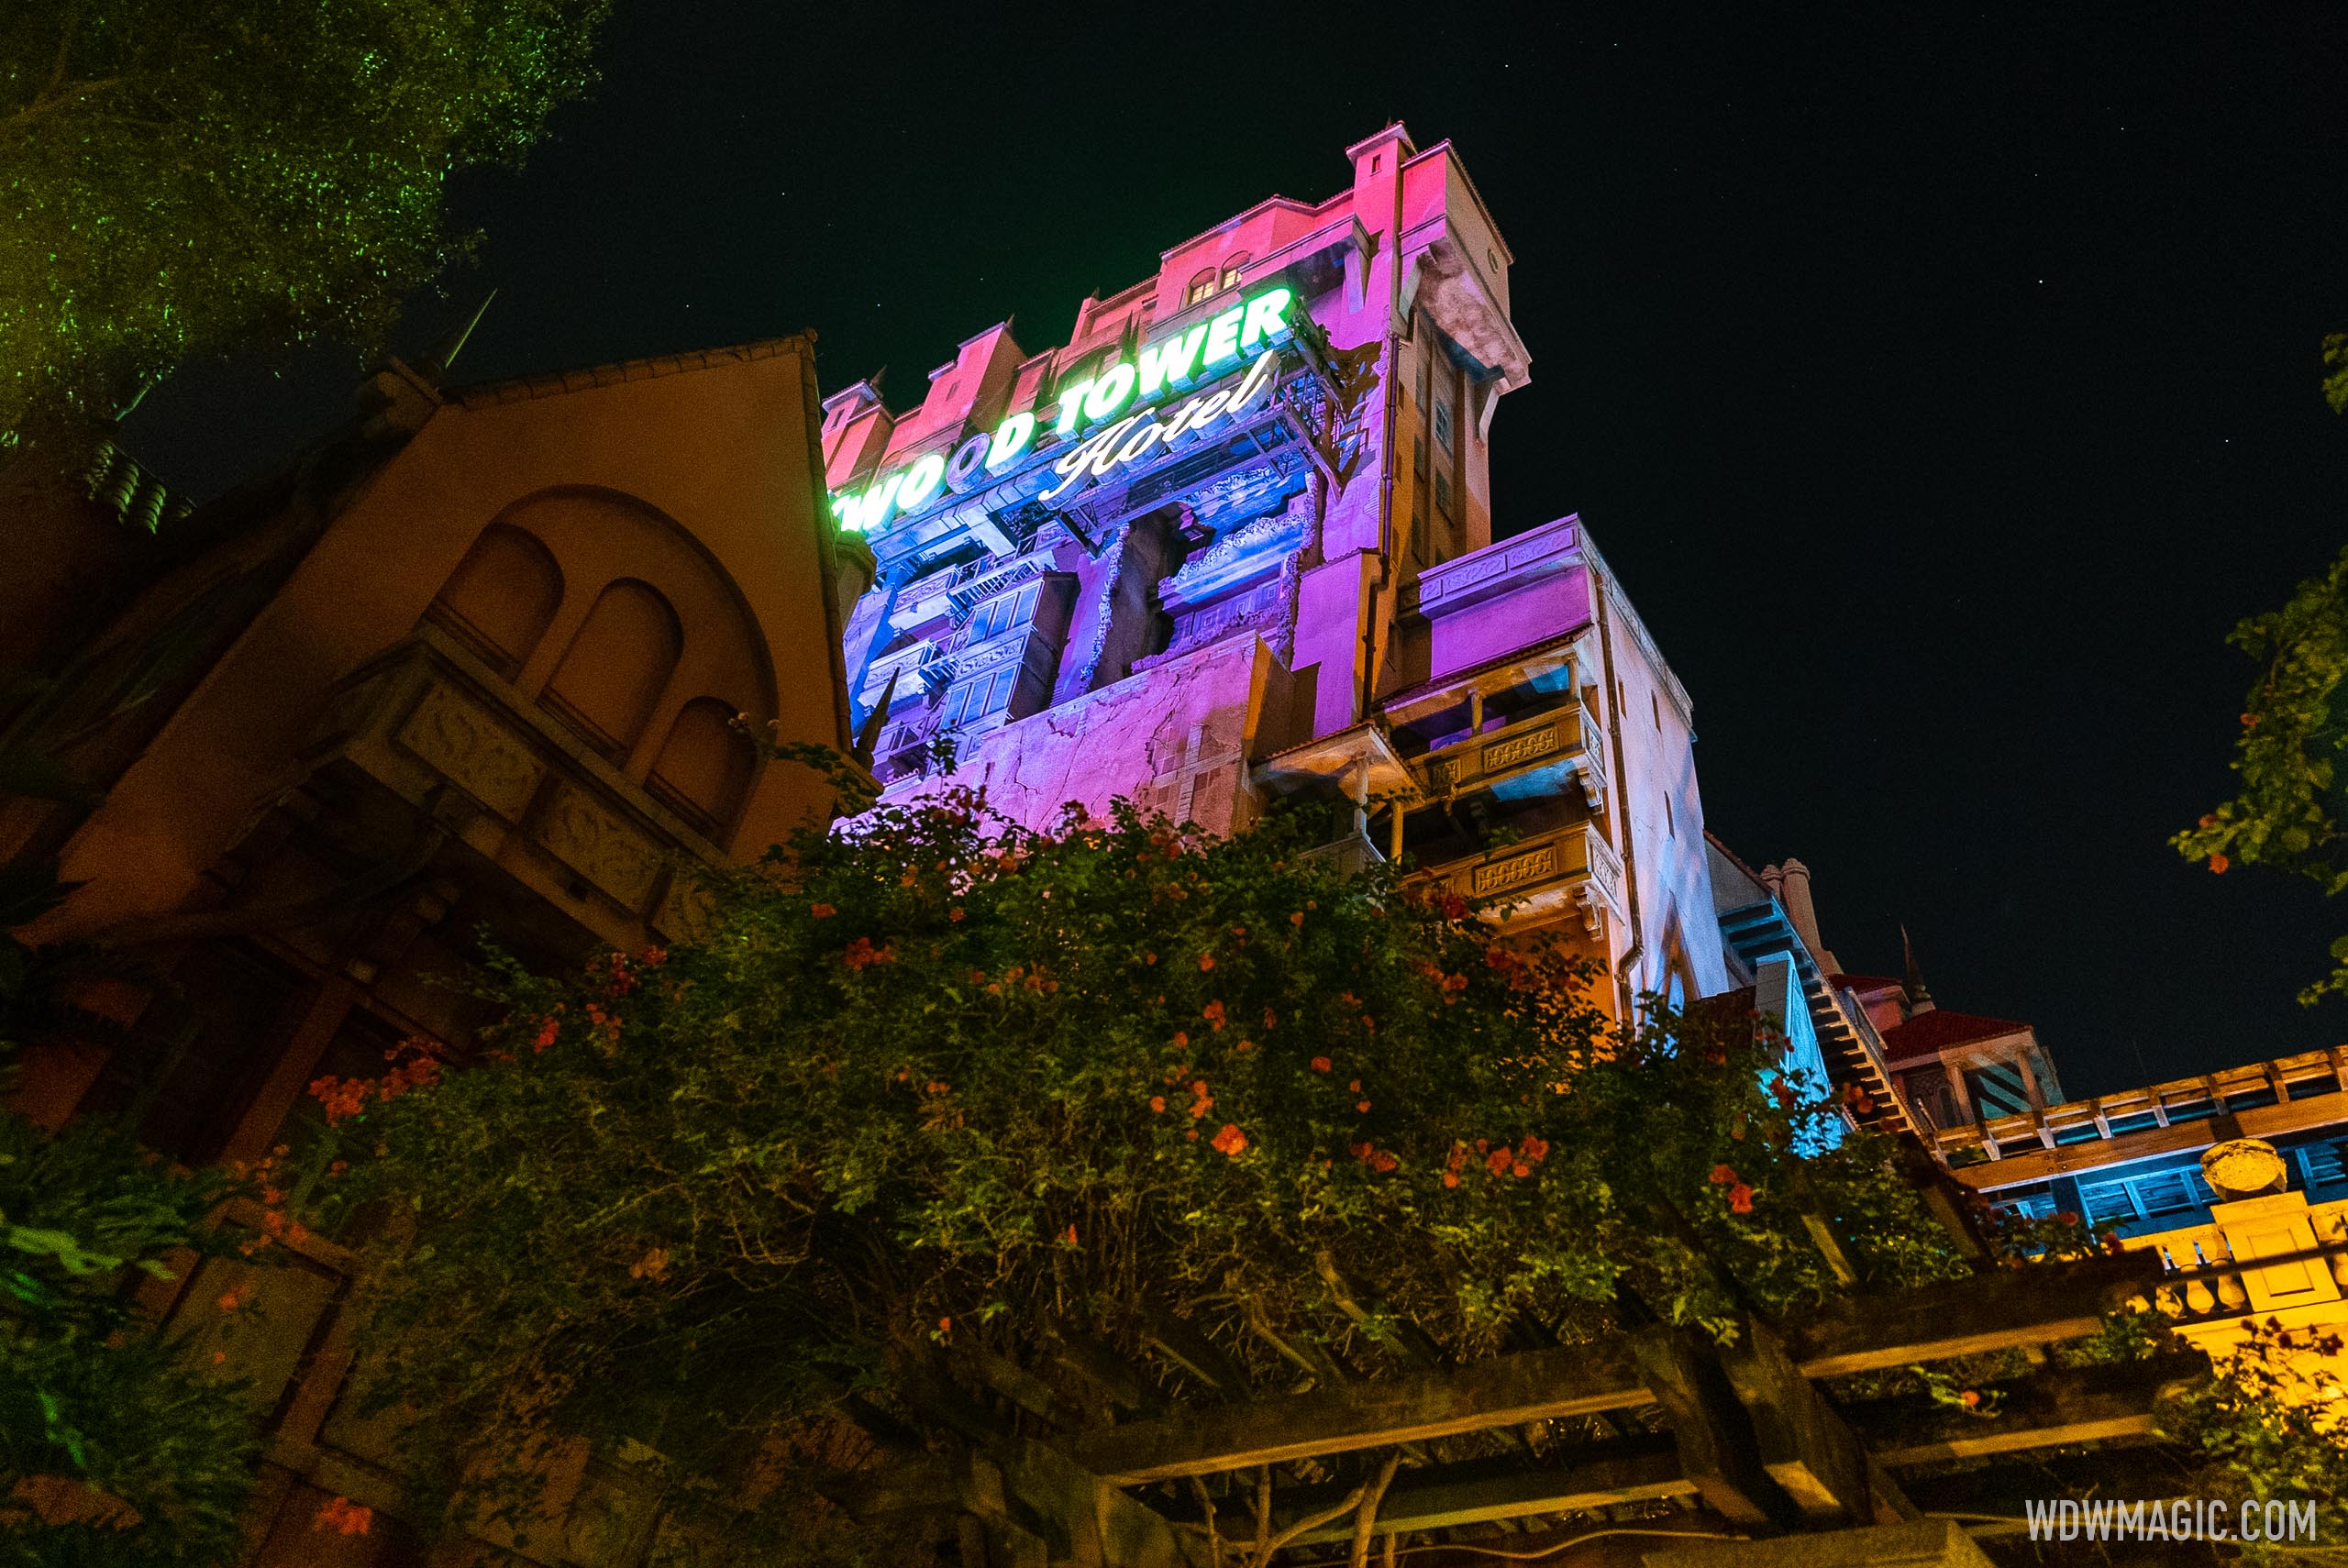 Only four nights remain for Disney After Hours at Disney's Hollywood Studios